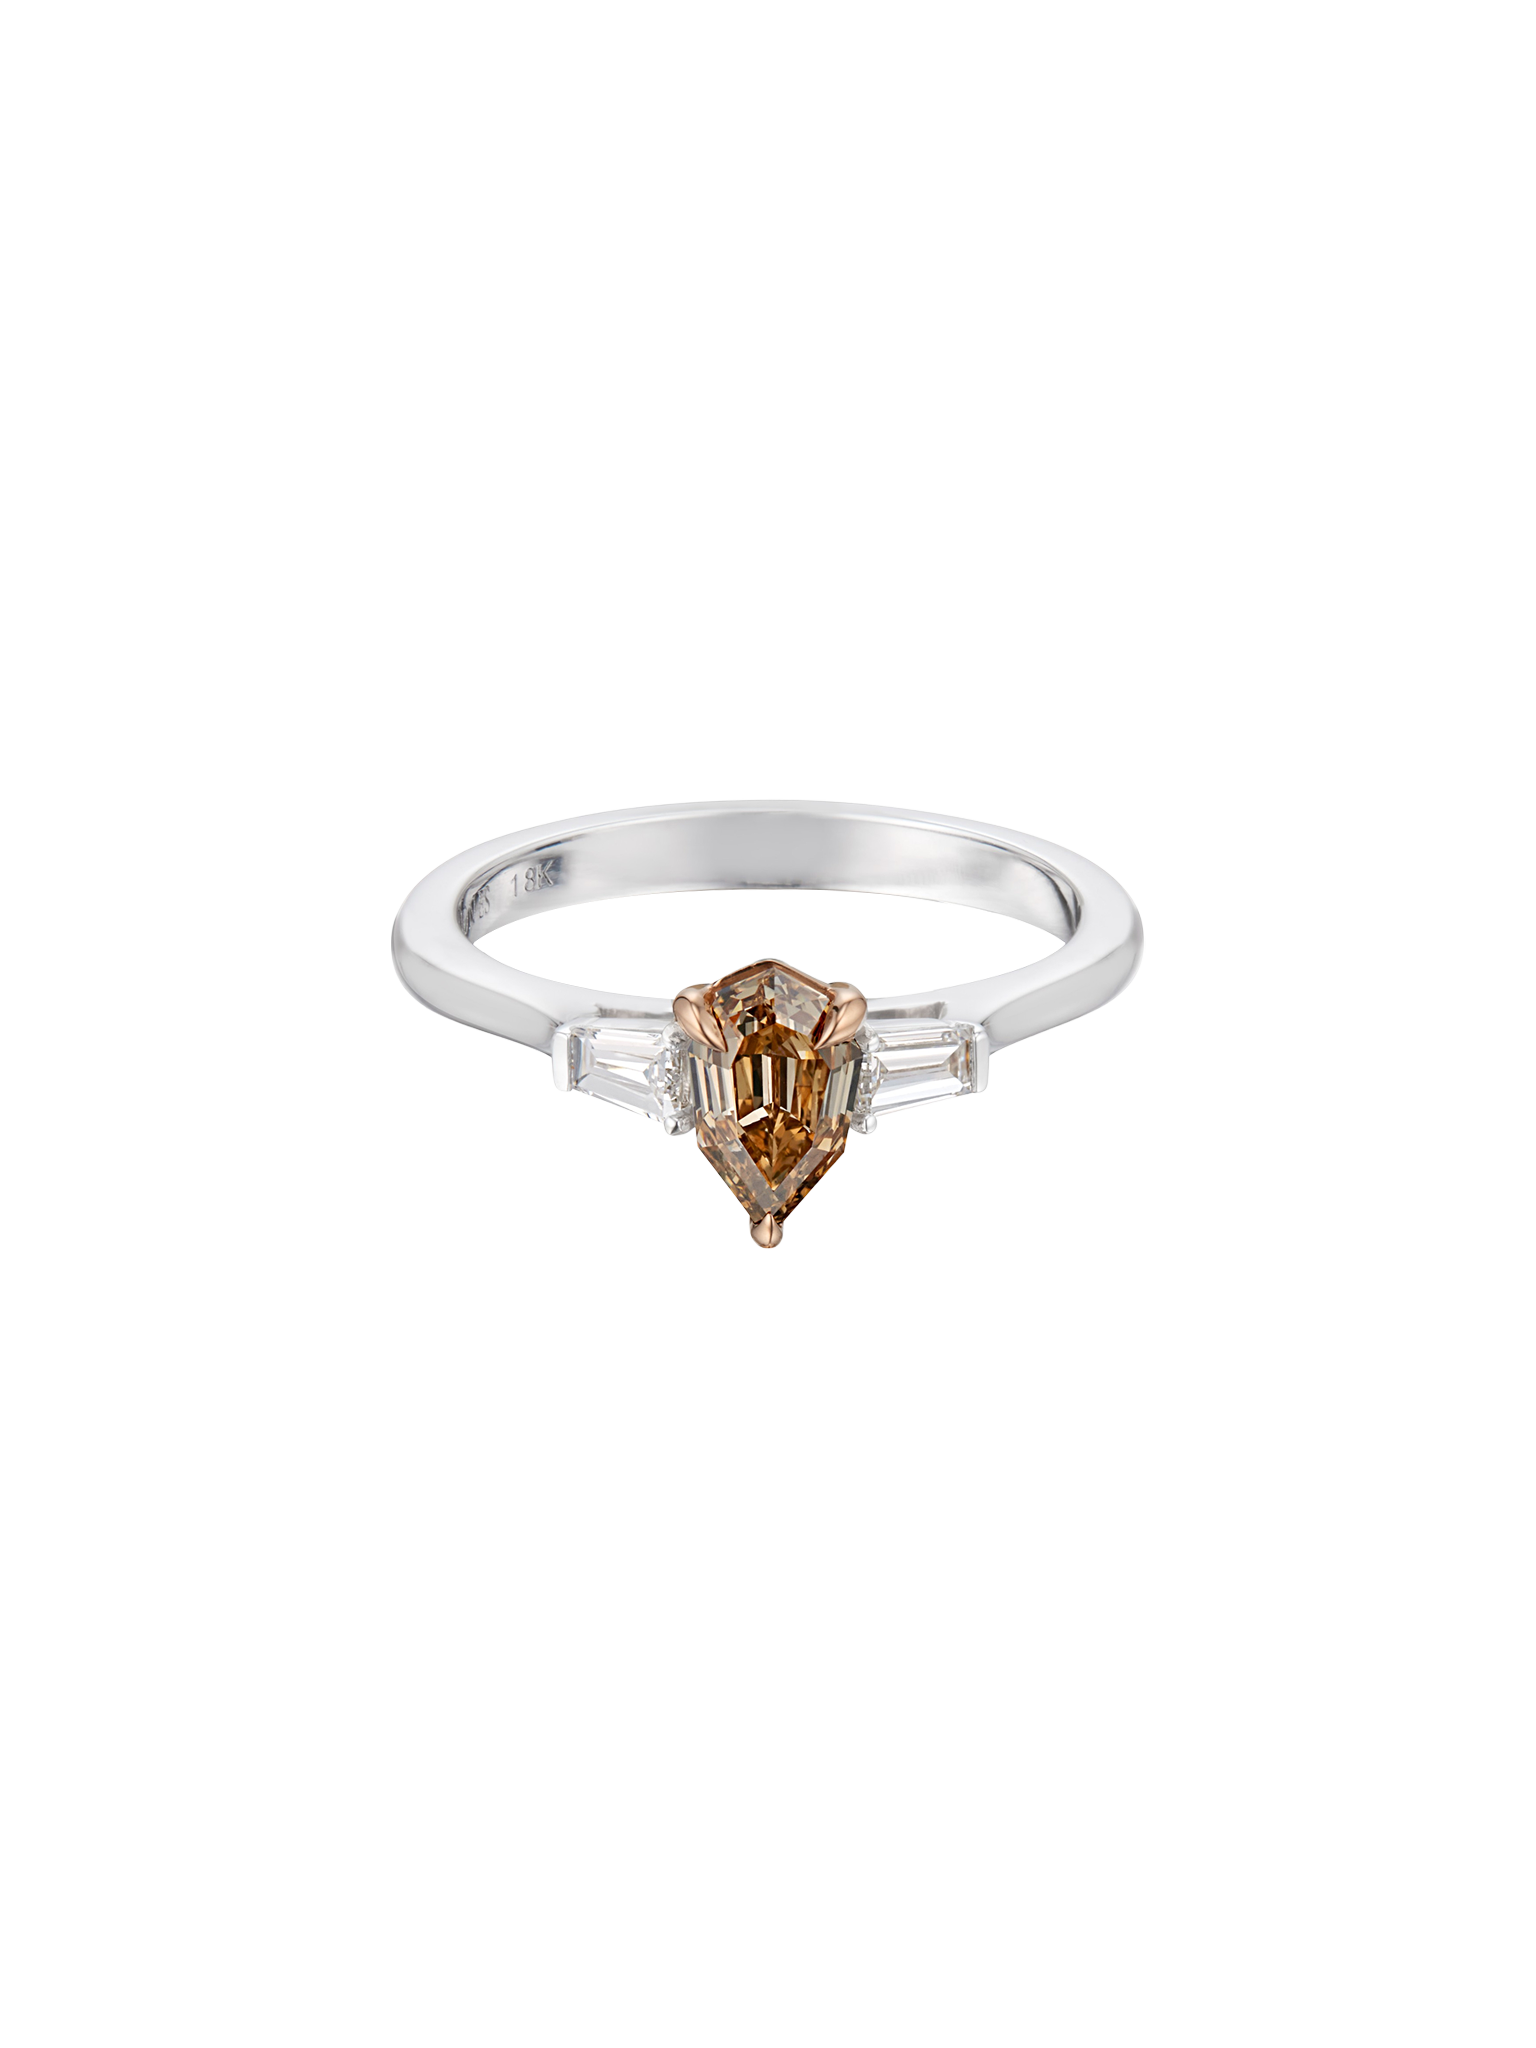 Alternative modified pear fancy champagne & white diamond engagement ring in 18k white & rose gold